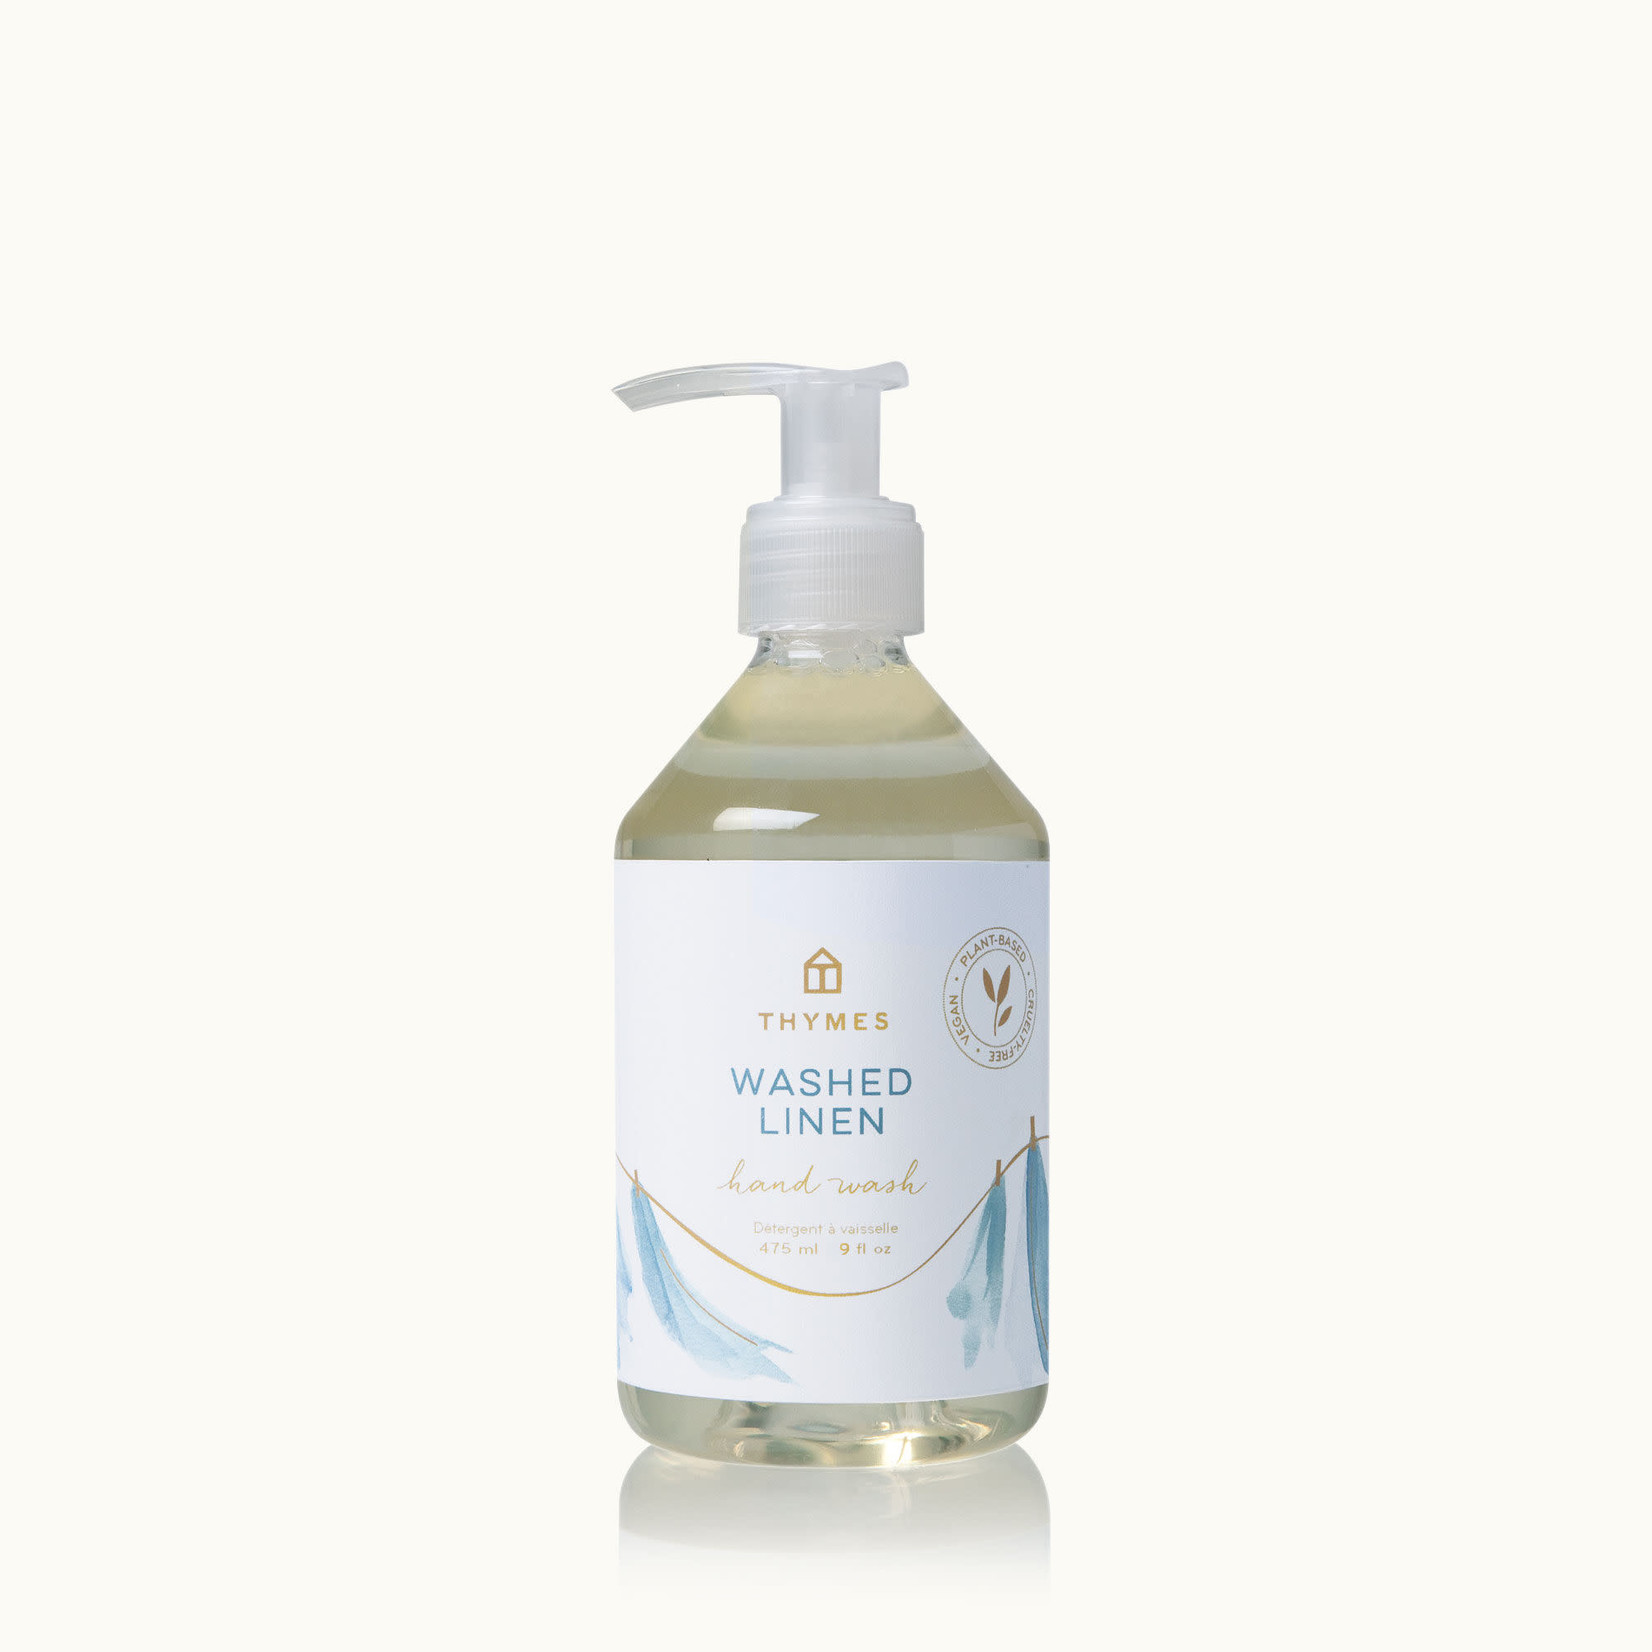 Thymes Thymes Washed Linen Hand Wash 9 oz